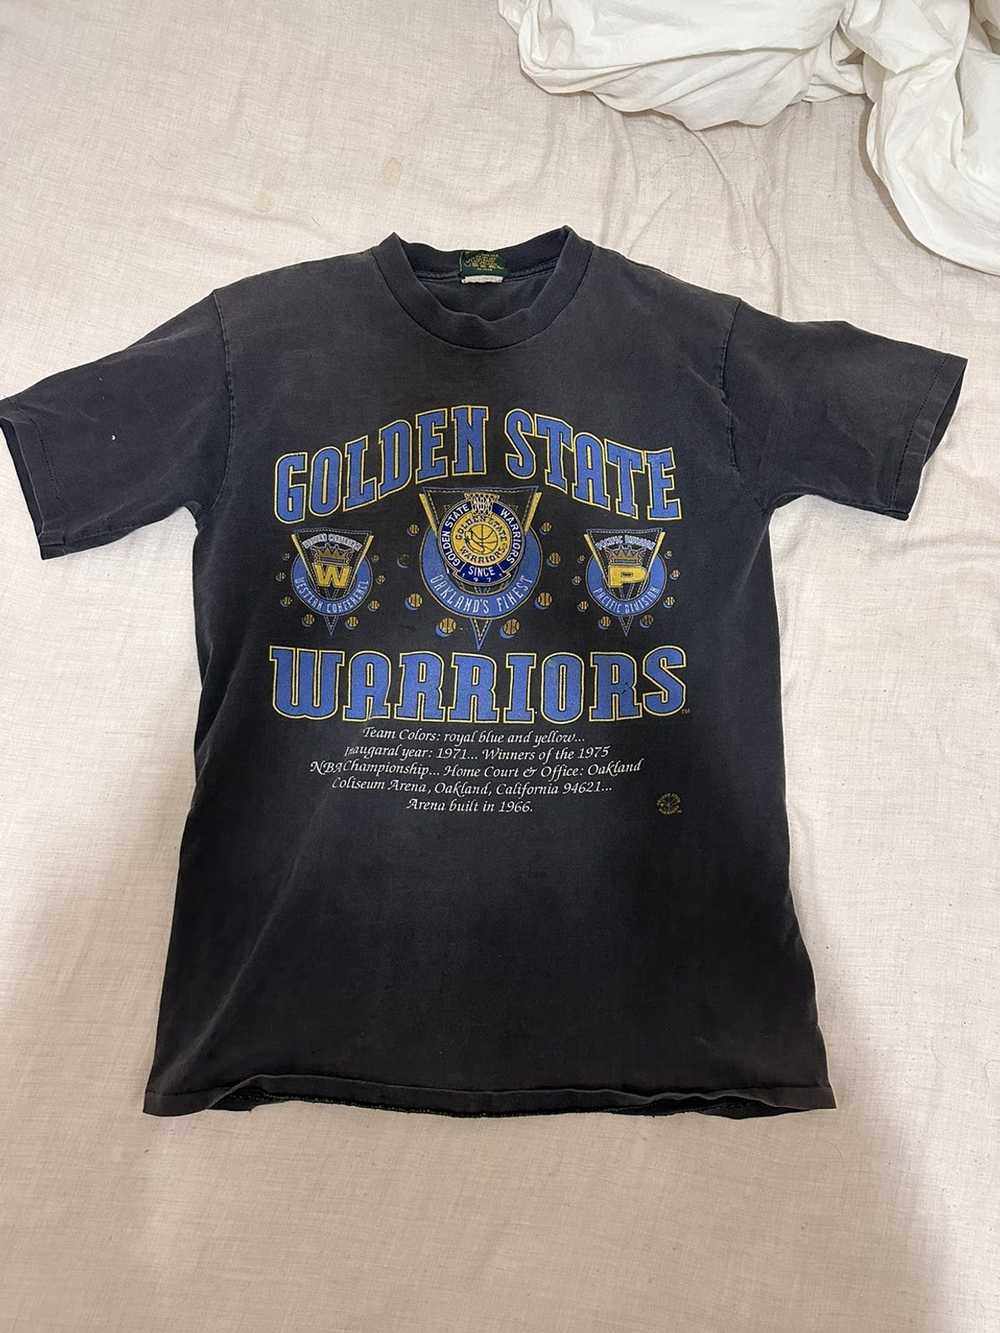 Vintage Golden State Warriors T-shirt – For All To Envy